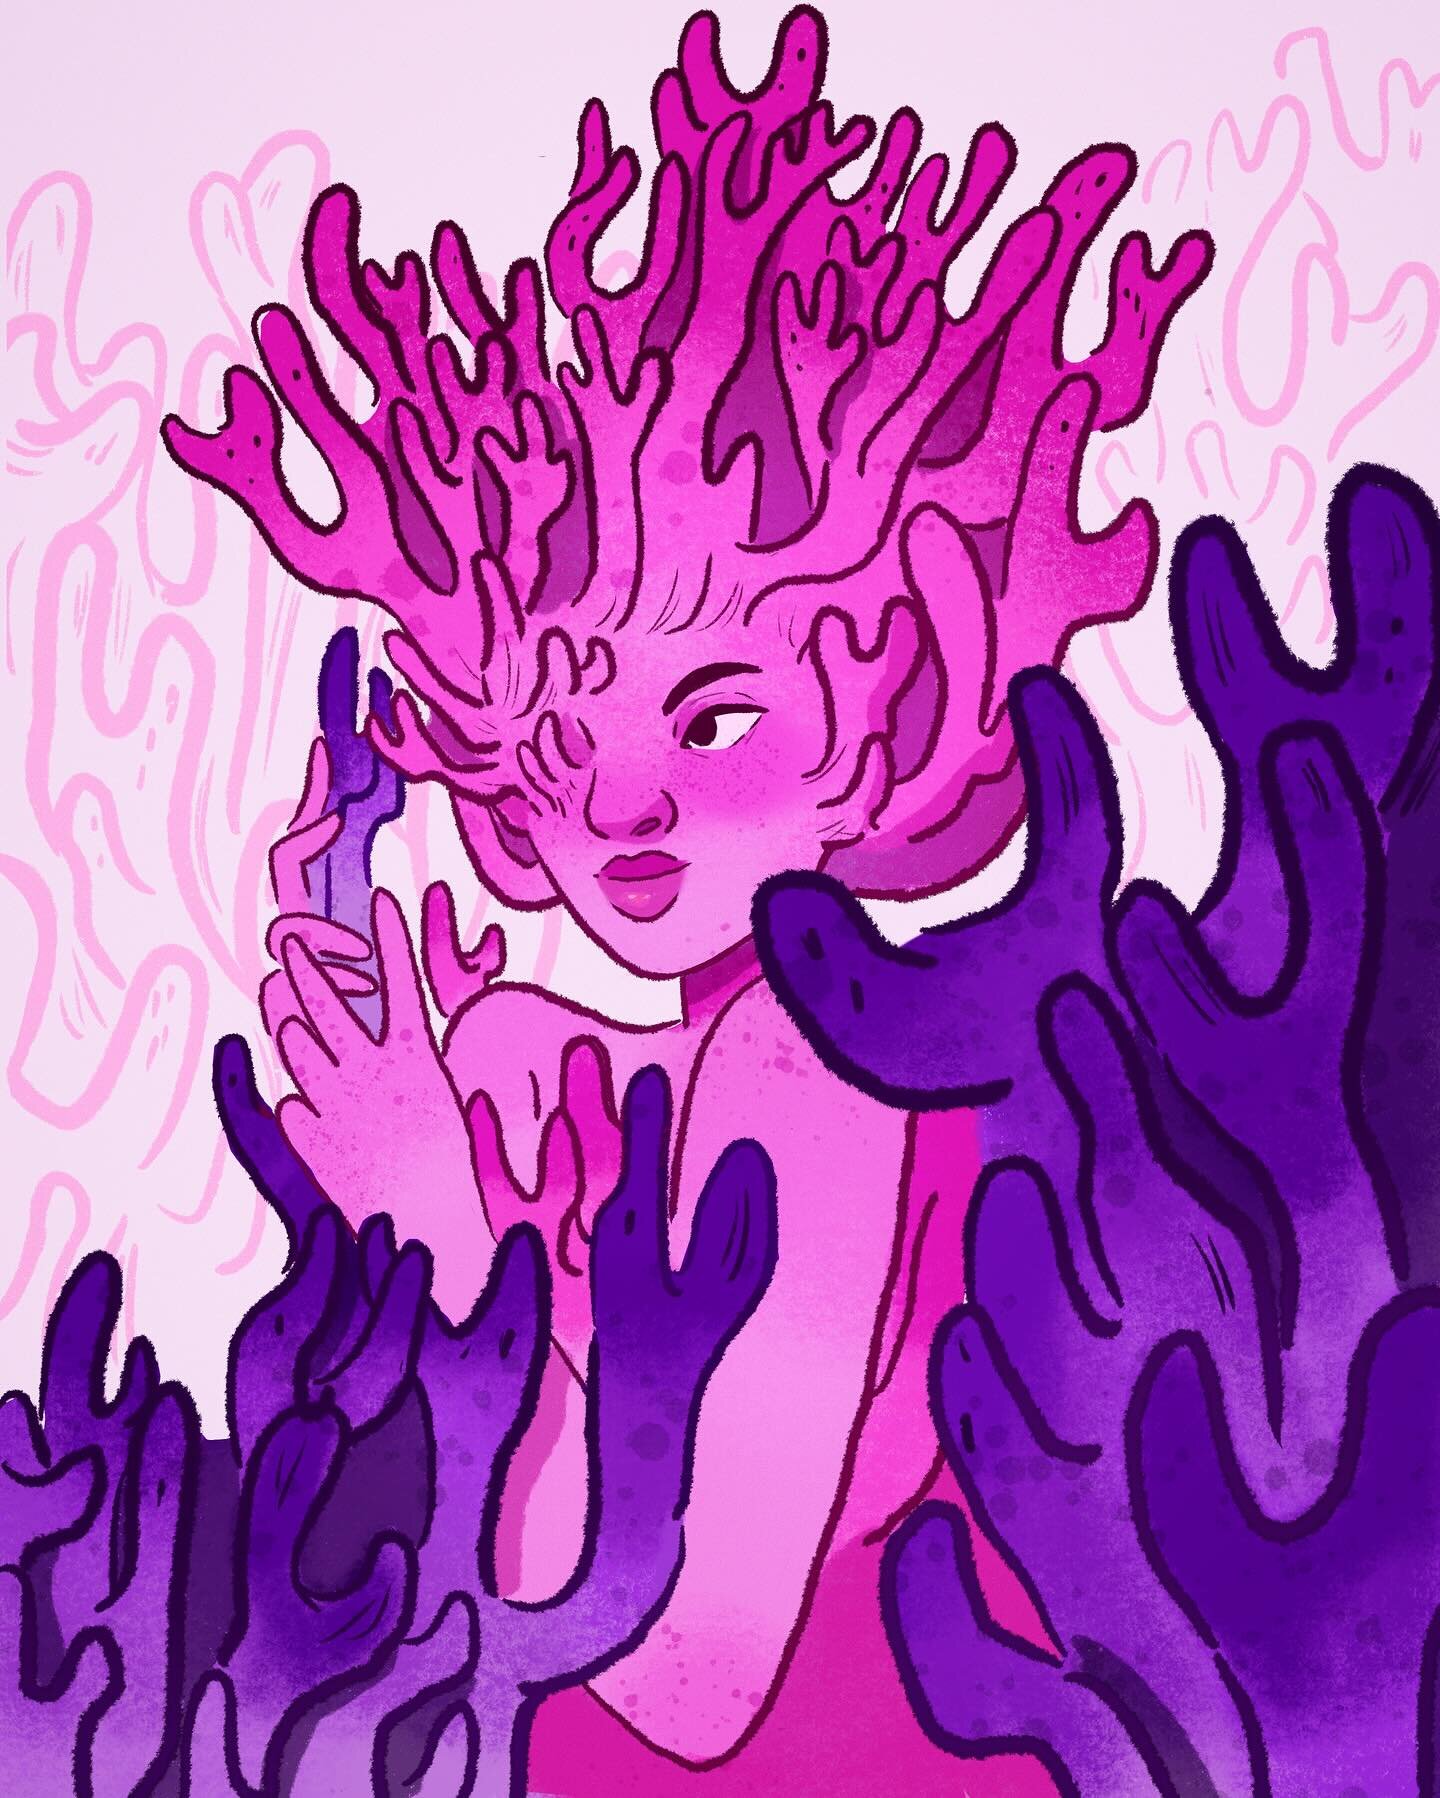 Lilac Coral Fungus! This one is a rework of when I first participated in #funguary swipe right to see the original and the fungus. 💕🍄

#funguary2024 #mushroomart #funguarychallenge #digitalart #digitalartist #procreateart #procreateart #februaryart